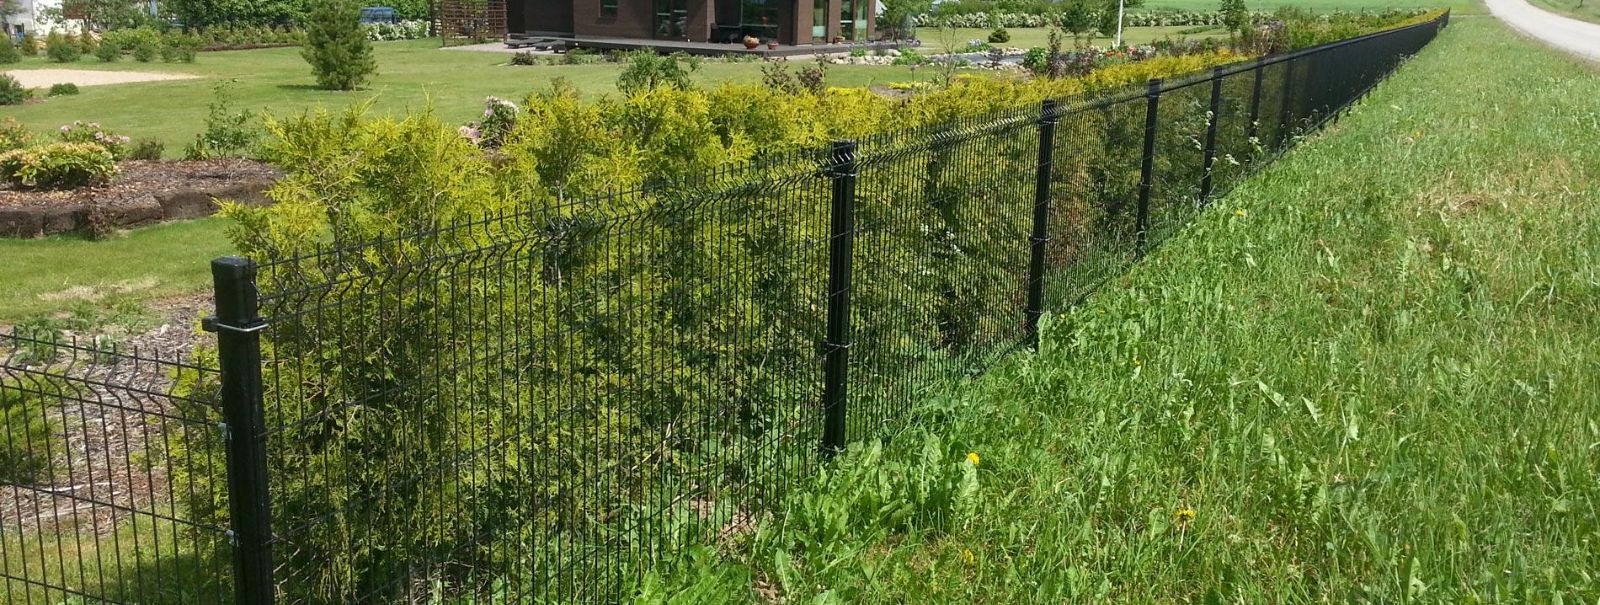 Custom metal fencing is a bespoke solution tailored to meet the specific needs and preferences of property owners. Unlike off-the-shelf options, custom fences a